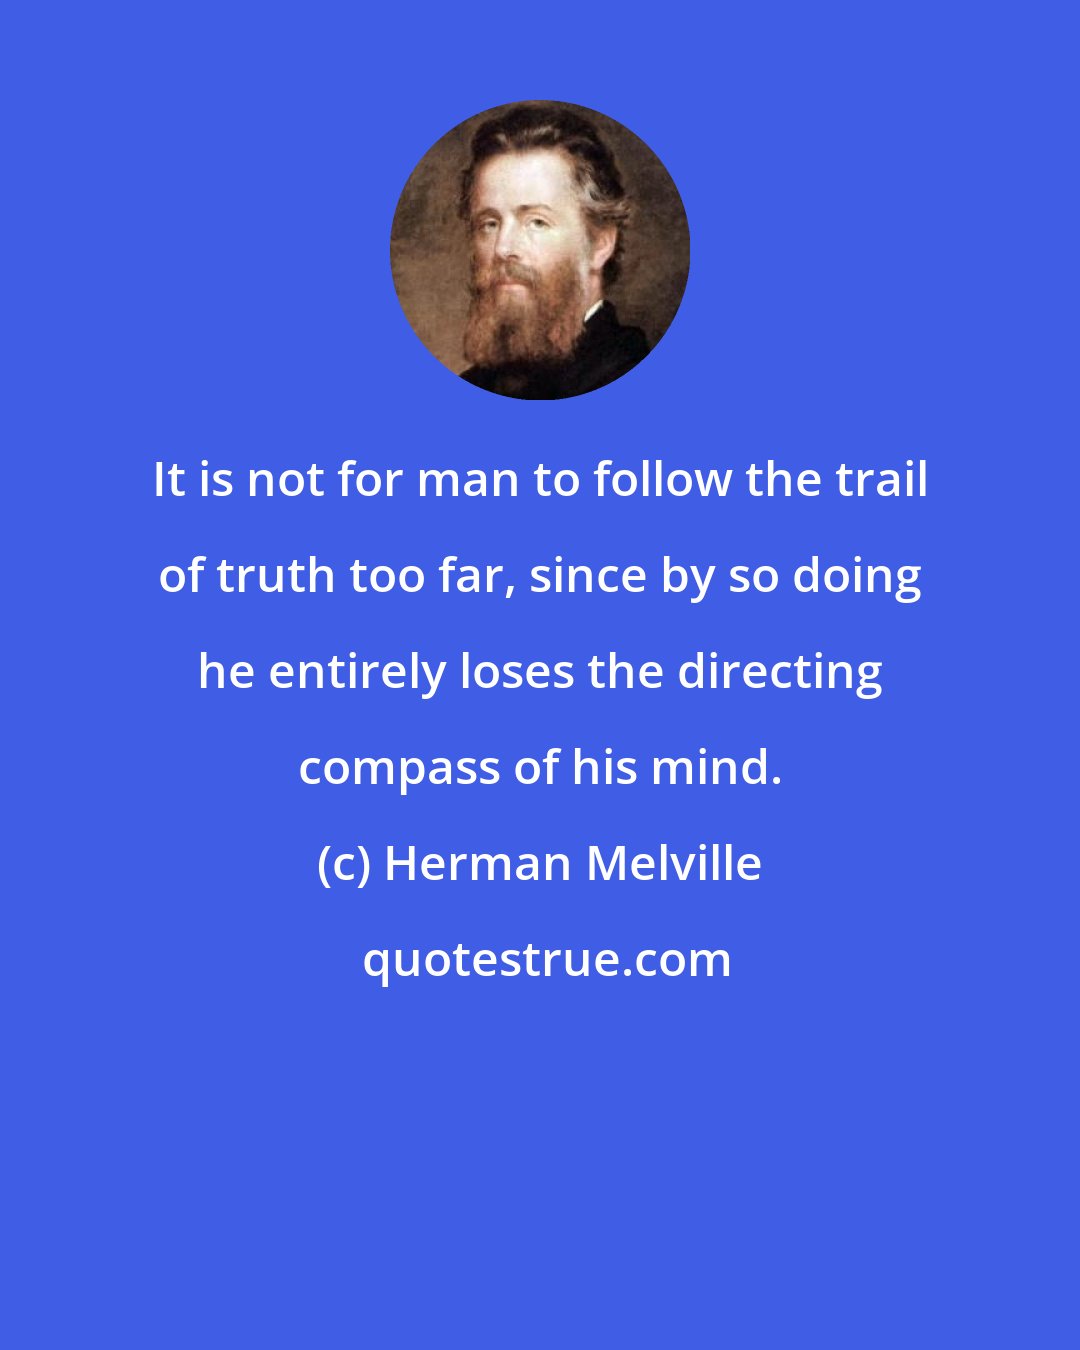 Herman Melville: It is not for man to follow the trail of truth too far, since by so doing he entirely loses the directing compass of his mind.